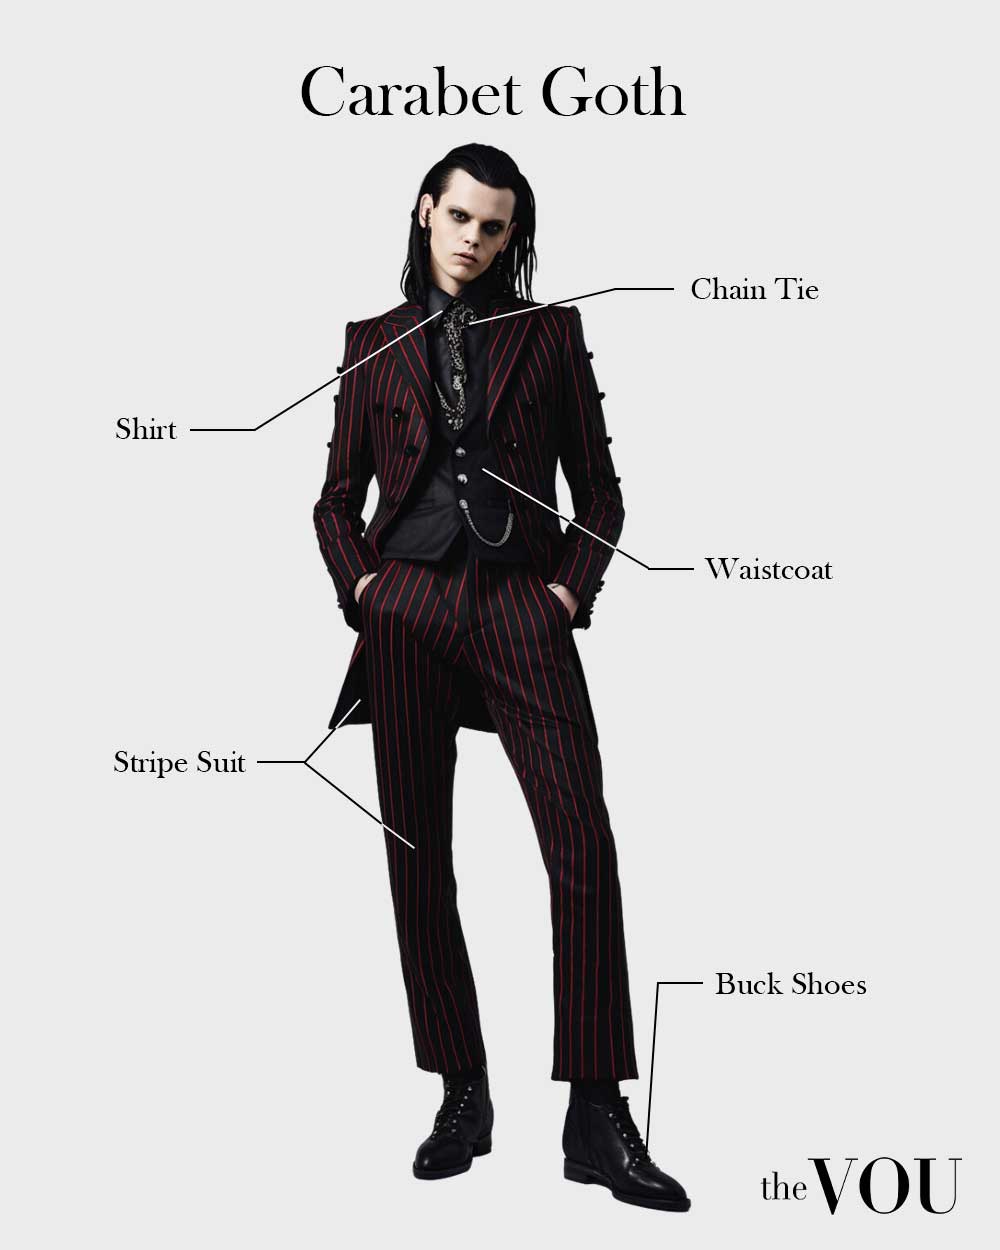 carabet goth outfit elements